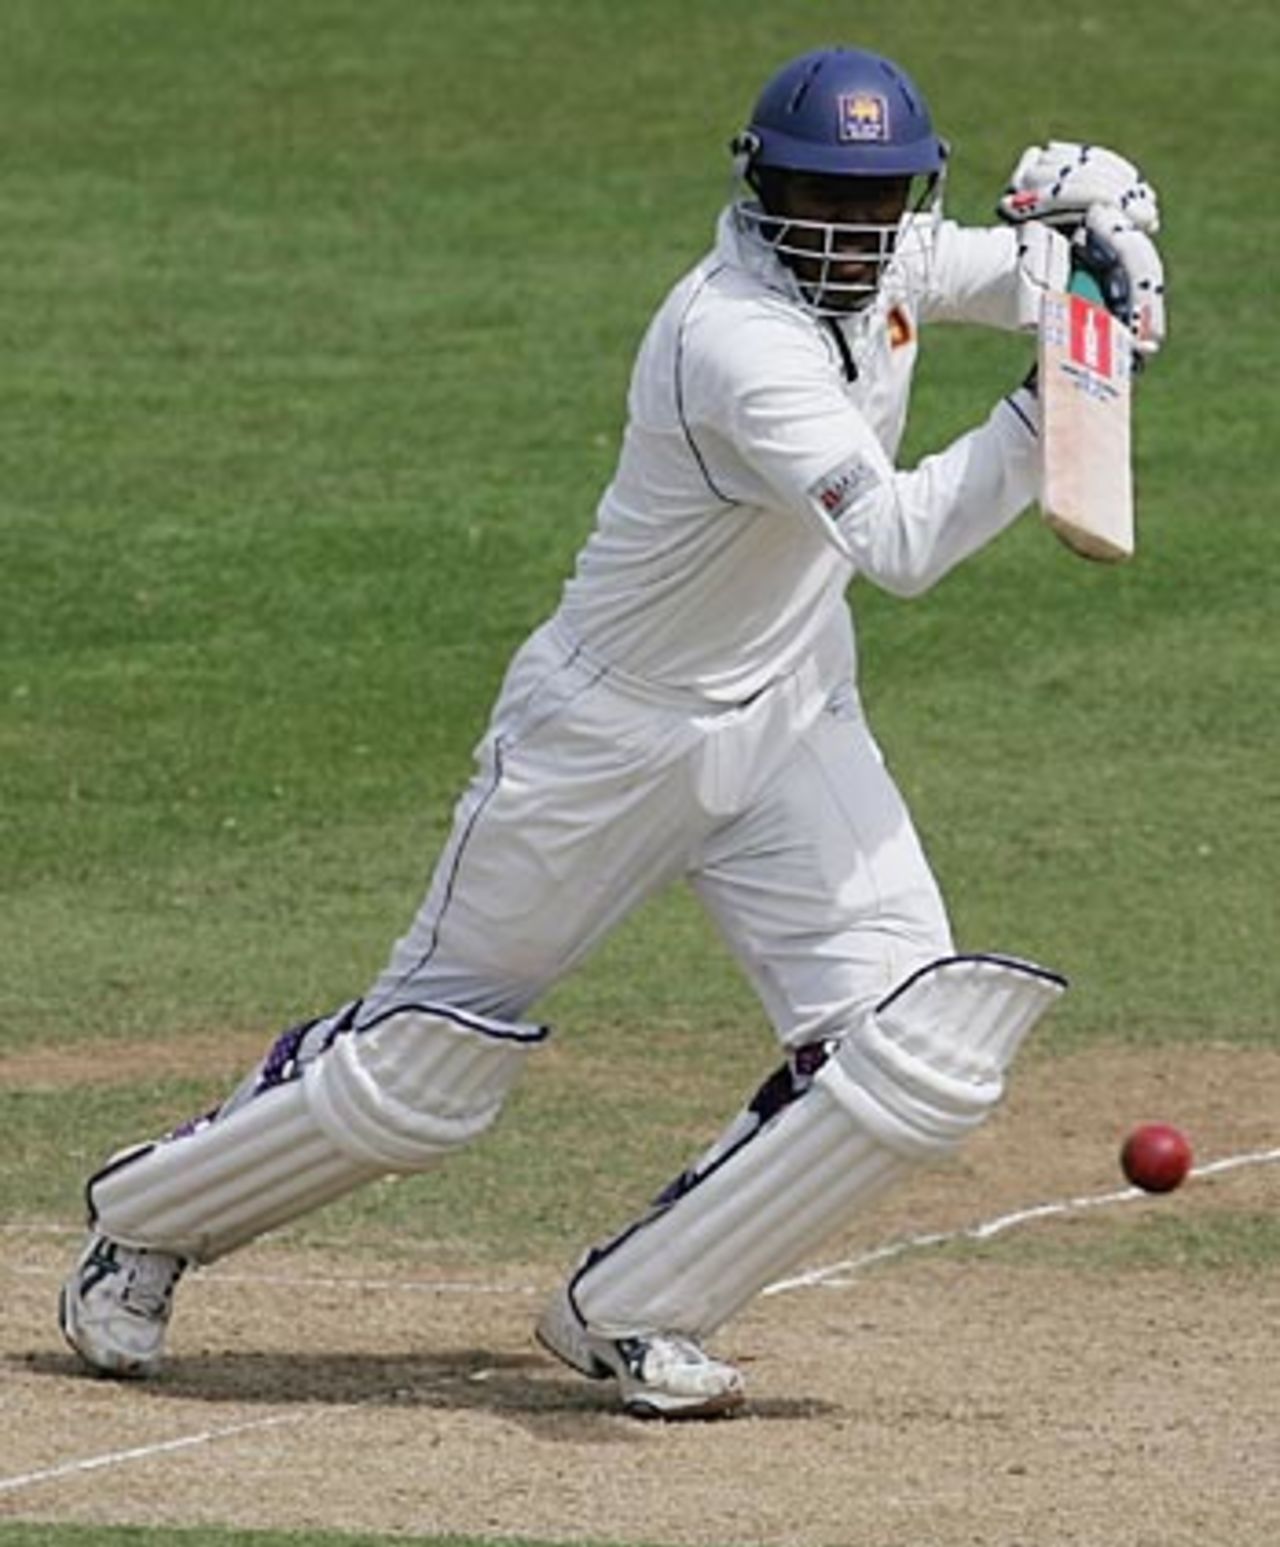 Chamara Kapugedera on his way to his maiden first-class hundred, Sussex v Sri Lankans, Hove, May 19, 2006